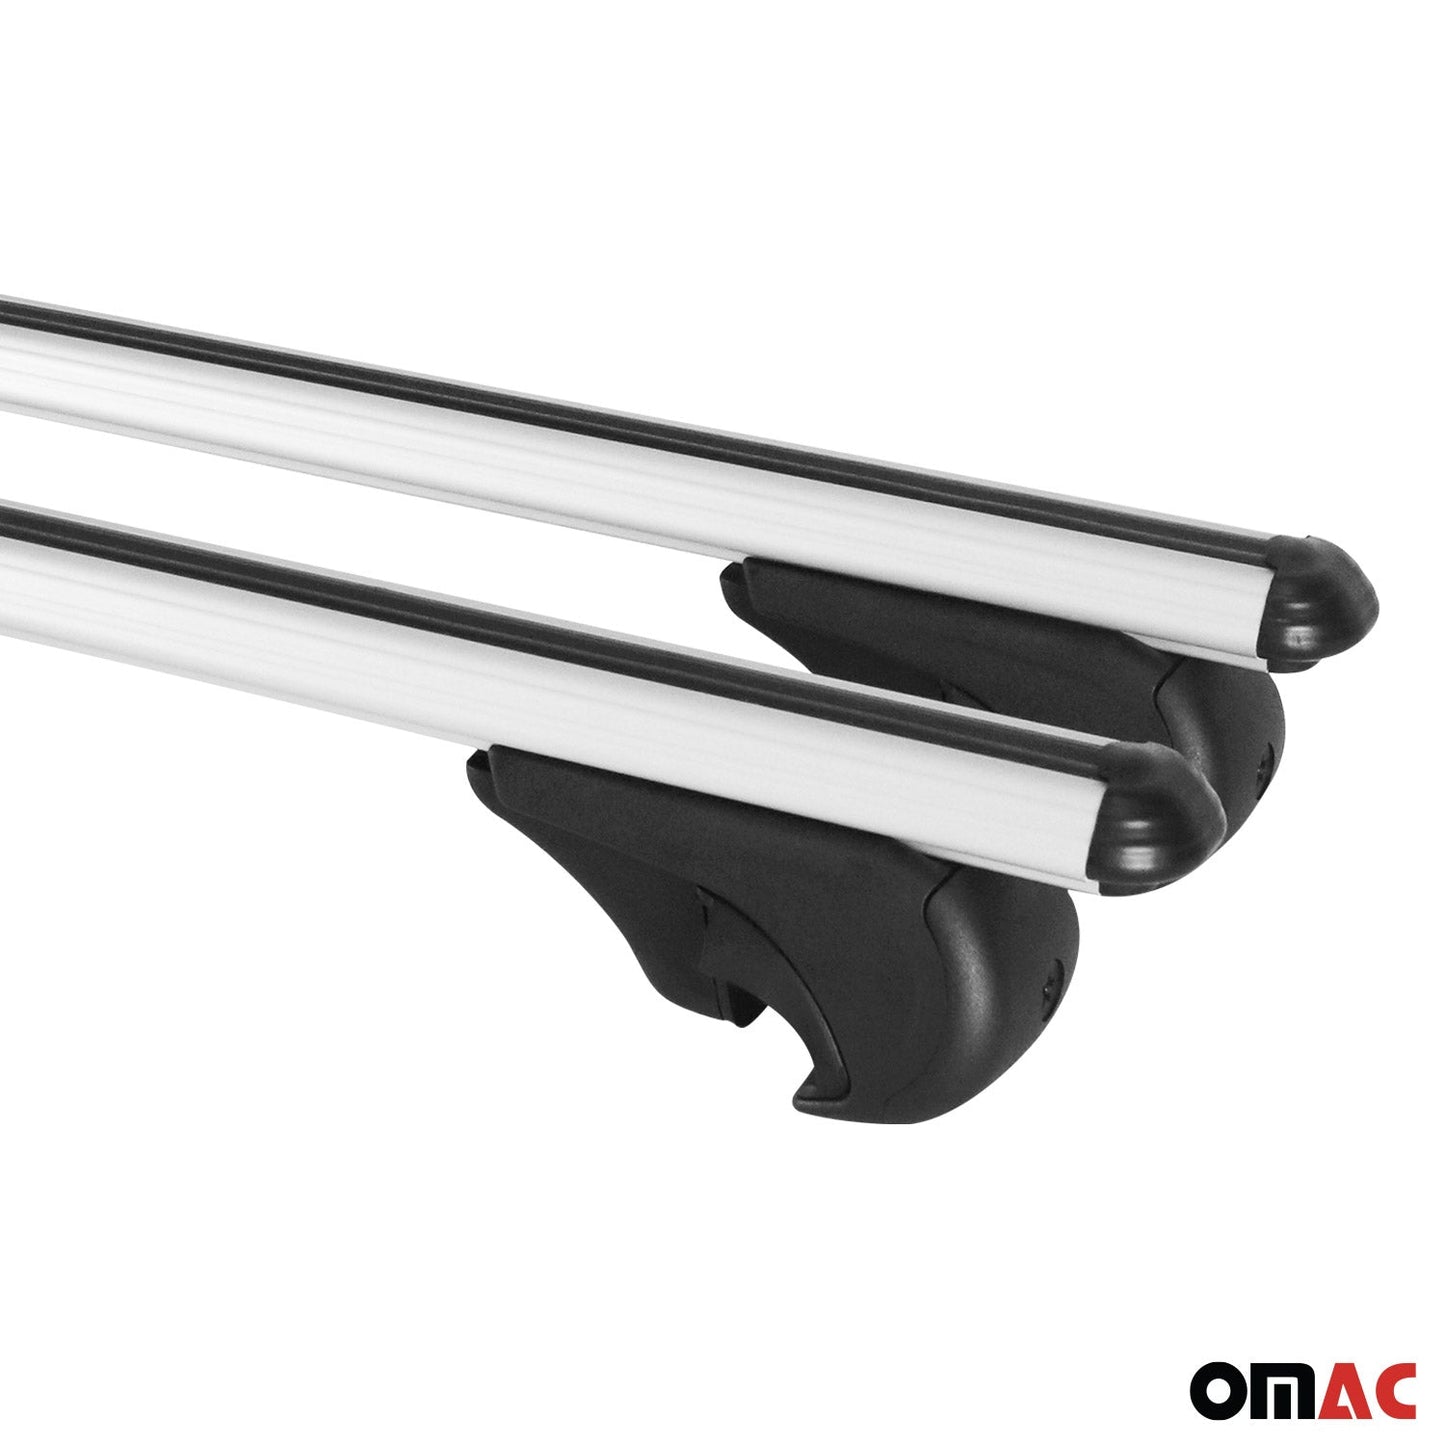 OMAC Lockable Roof Rack Cross Bars Carrier for Jeep Grand Cherokee 1999-2004 Gray 17159696929L